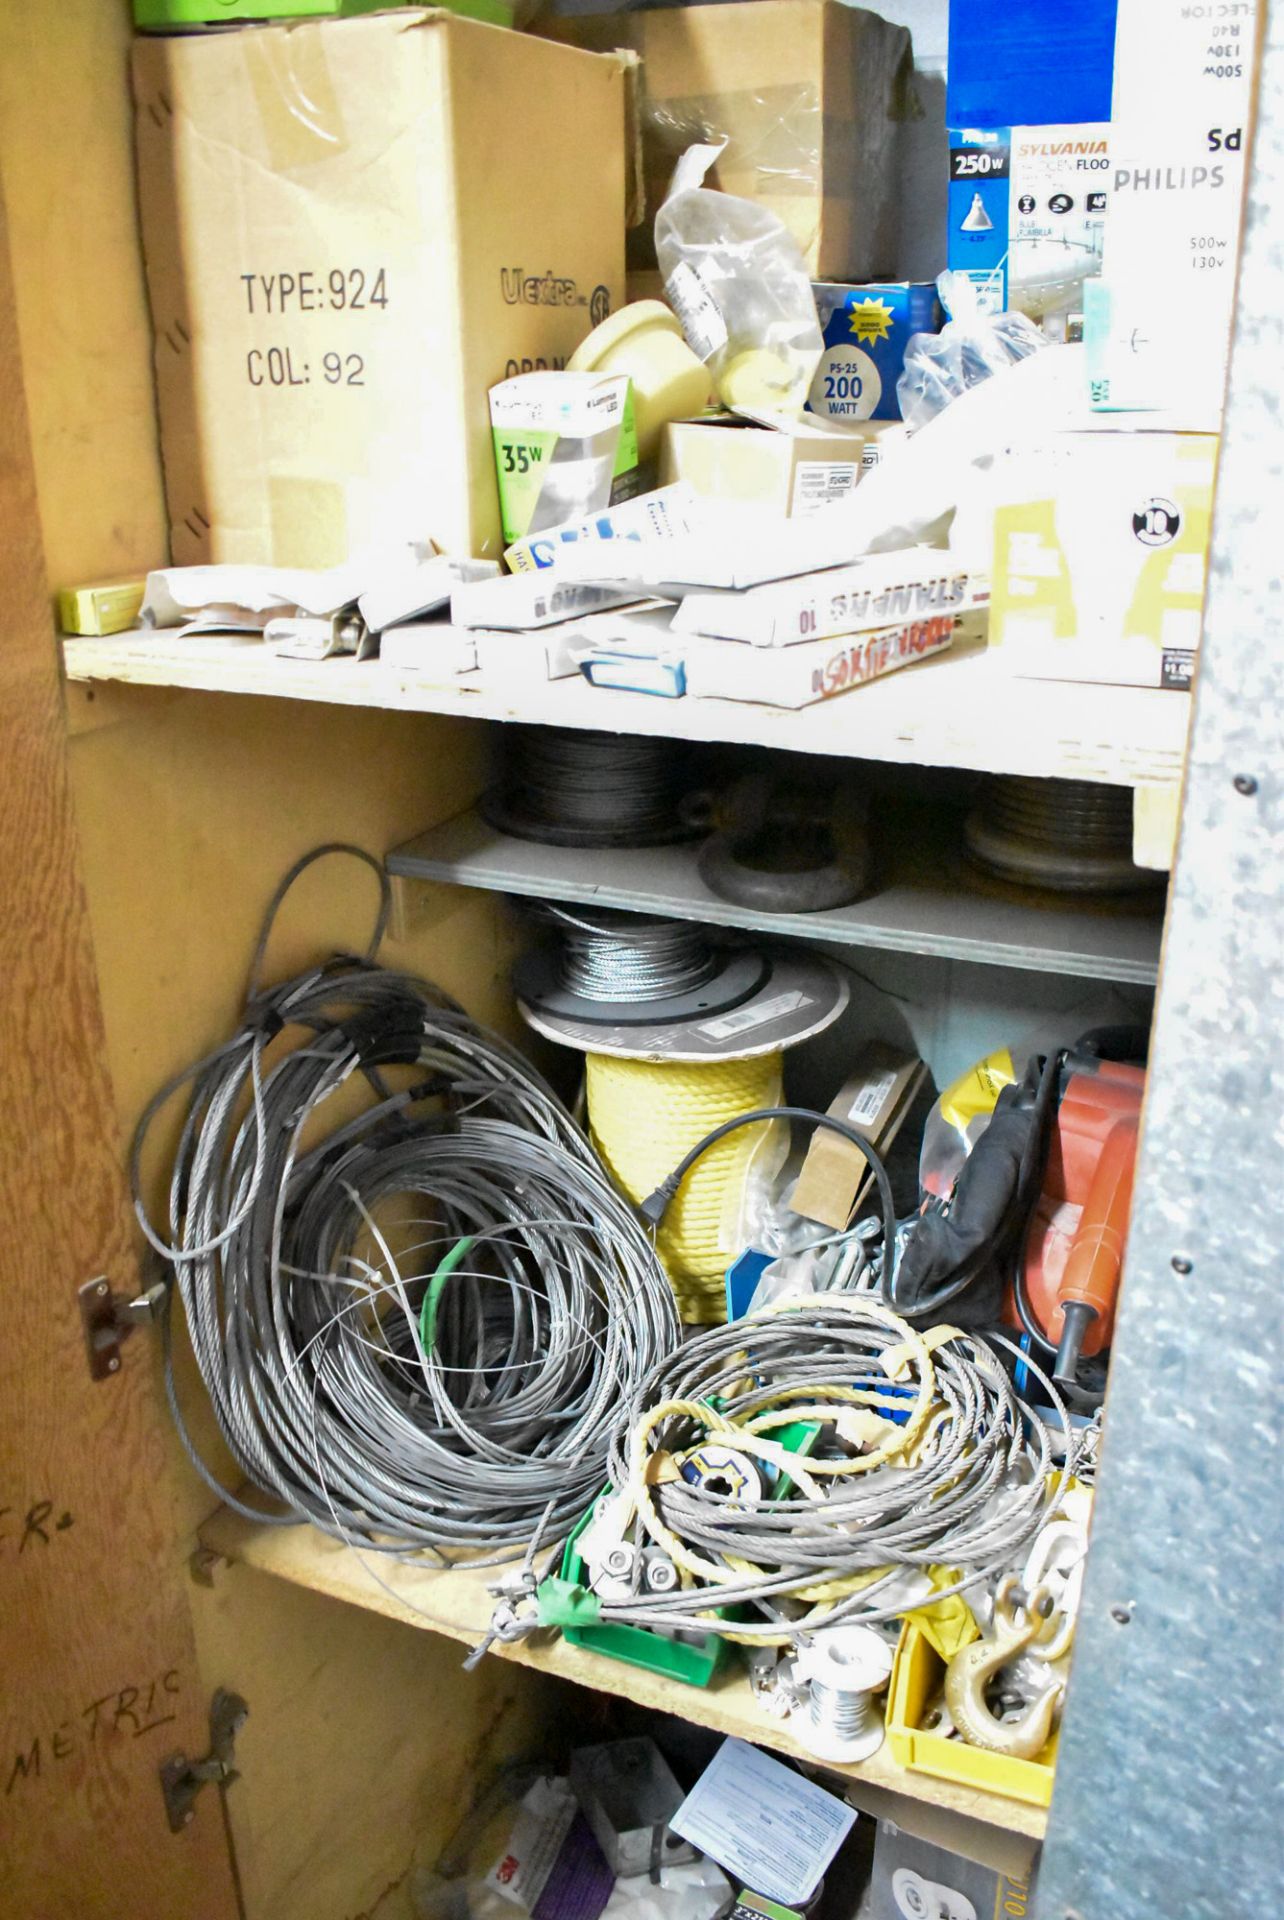 LOT/ STORAGE CABINETS WITH CONTENTS - SHOP SUPPLIES, CHEMICALS, HARDWARE, ELECTRICAL COMPONENTS, - Image 5 of 7